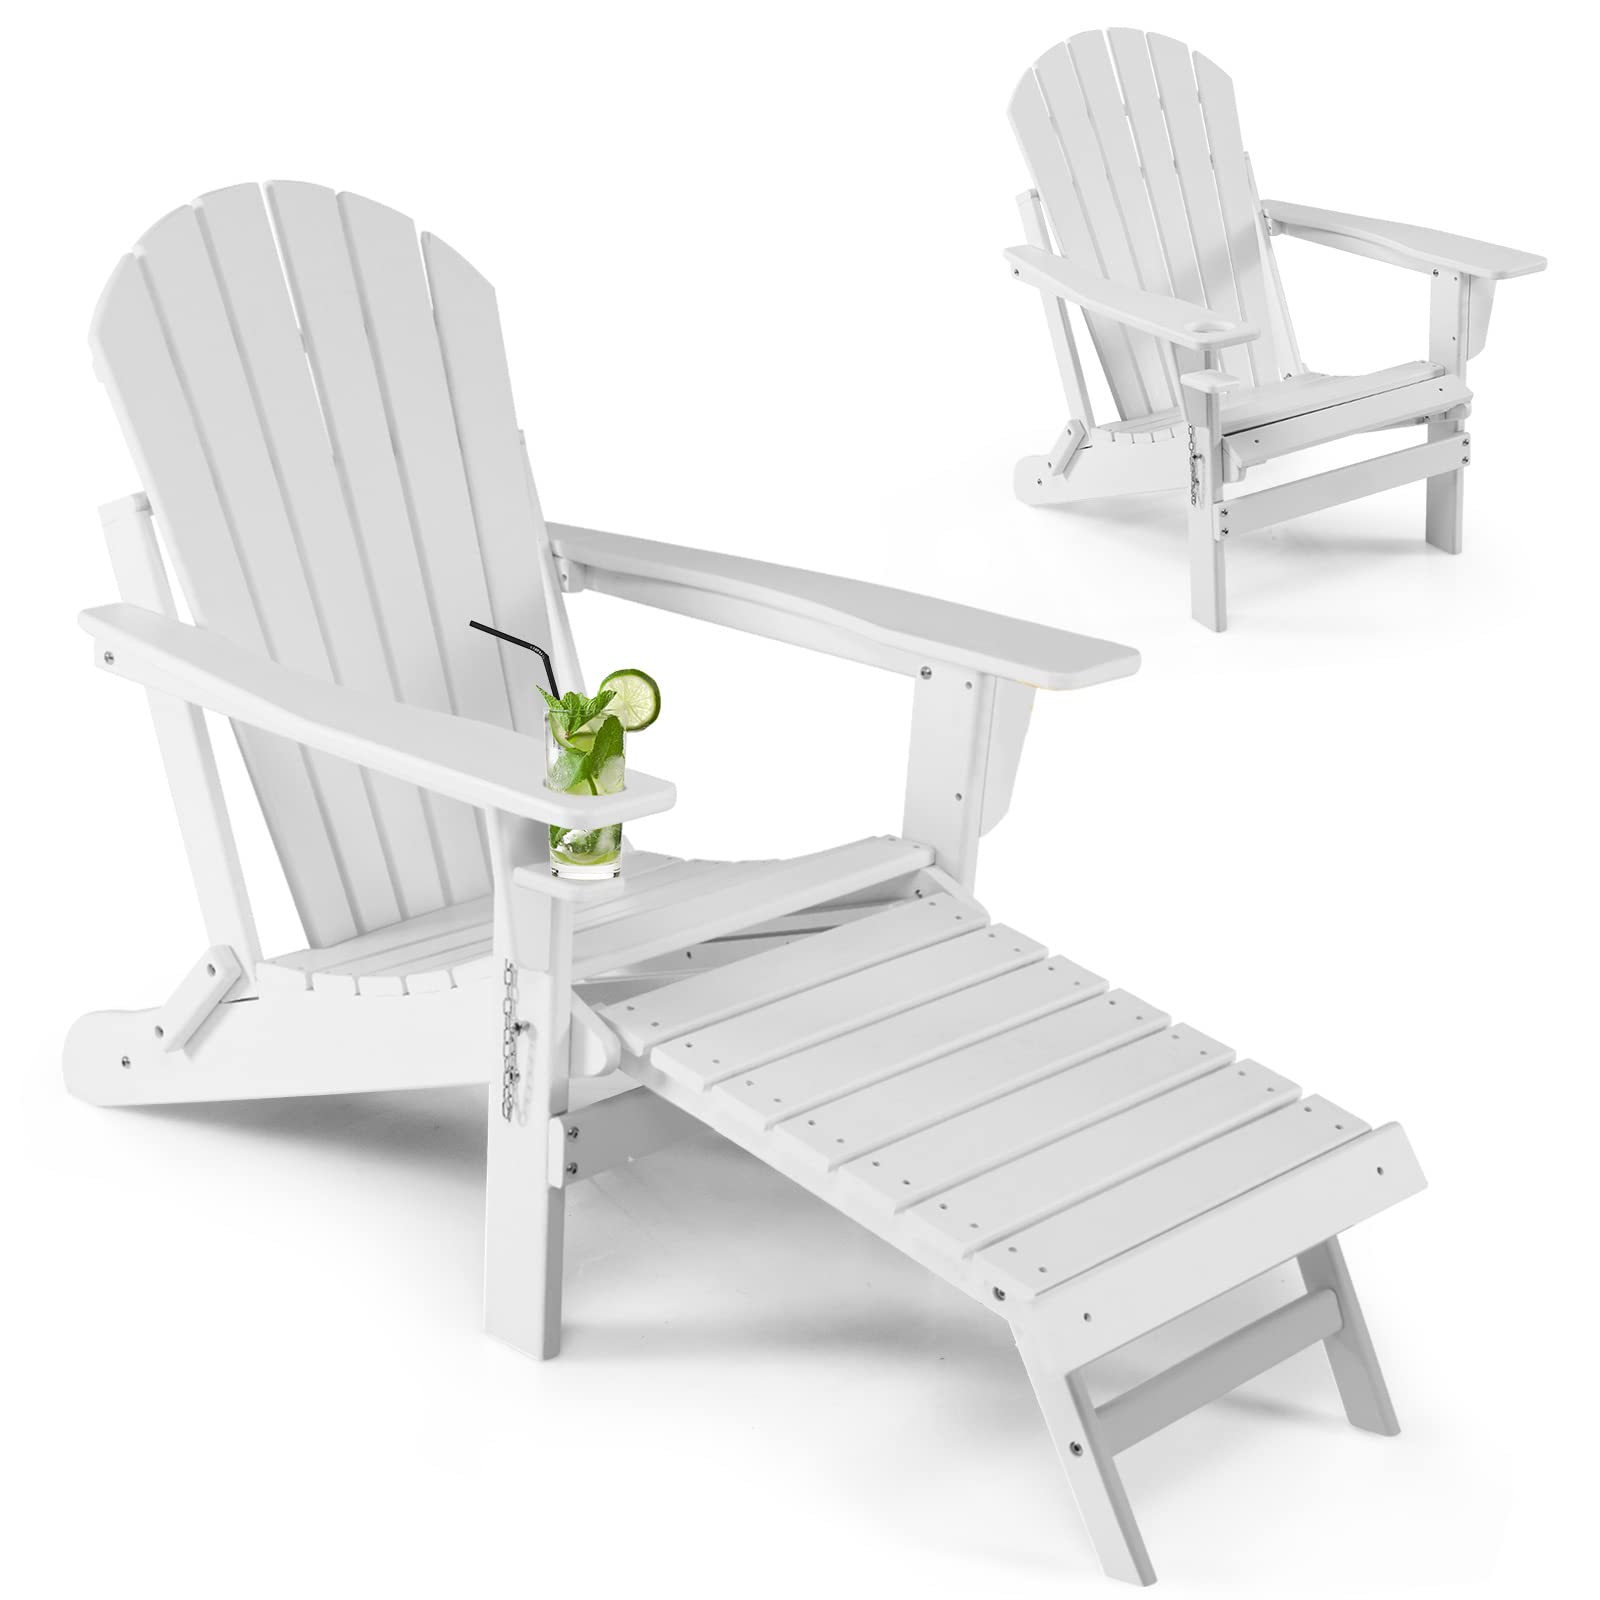 All-Weather Folding Adirondack Chair w/Retractable Ottoman & Cup Holder, HDPE Plastic Resin Outdoor Patio Lounger for Pool Deck